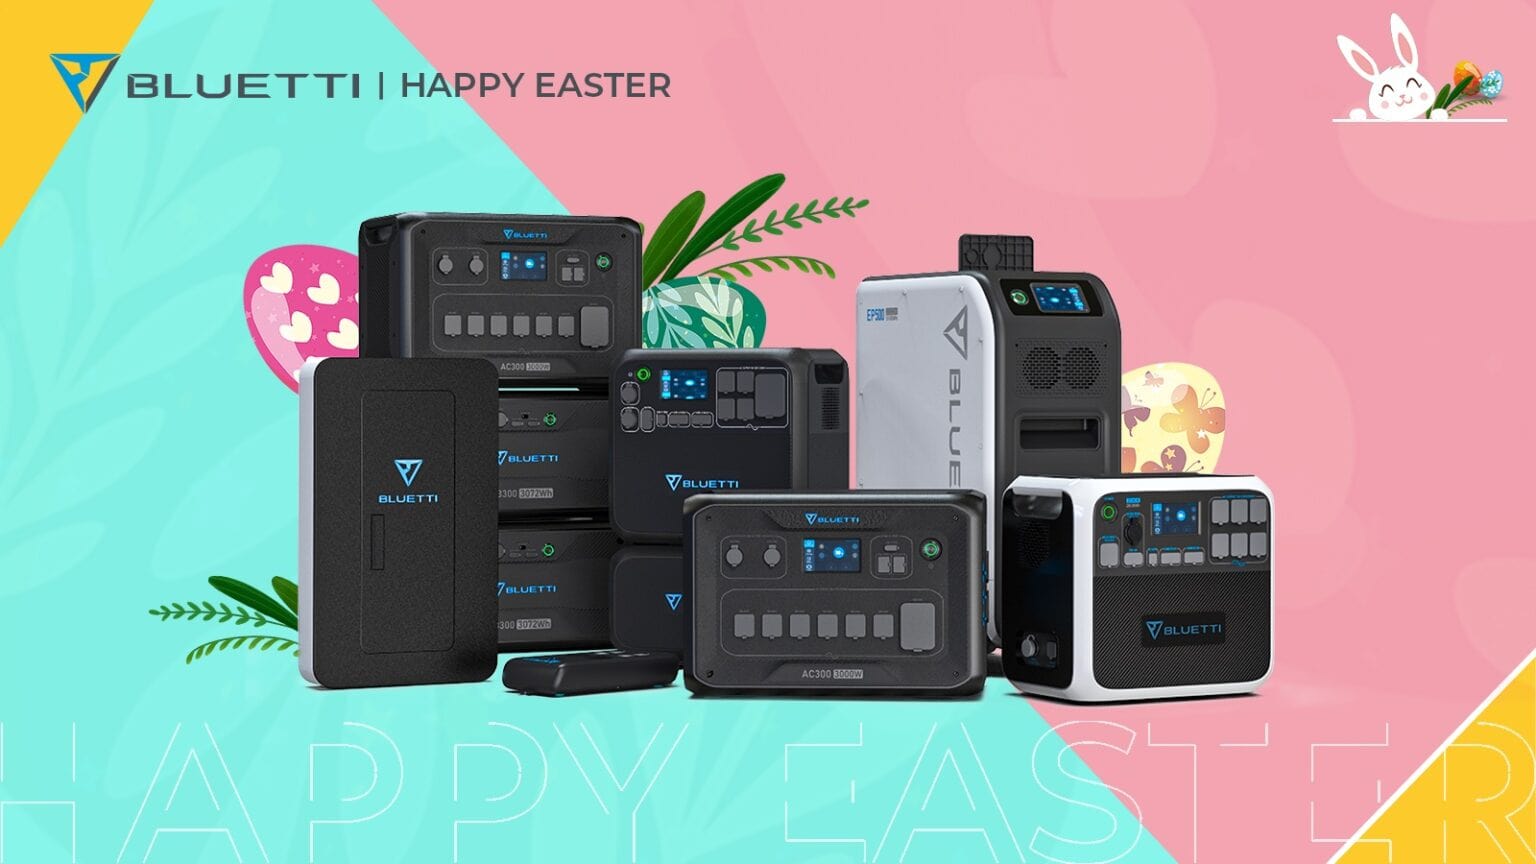 Save on Bluetti's high-end power stations in the Easter sale.